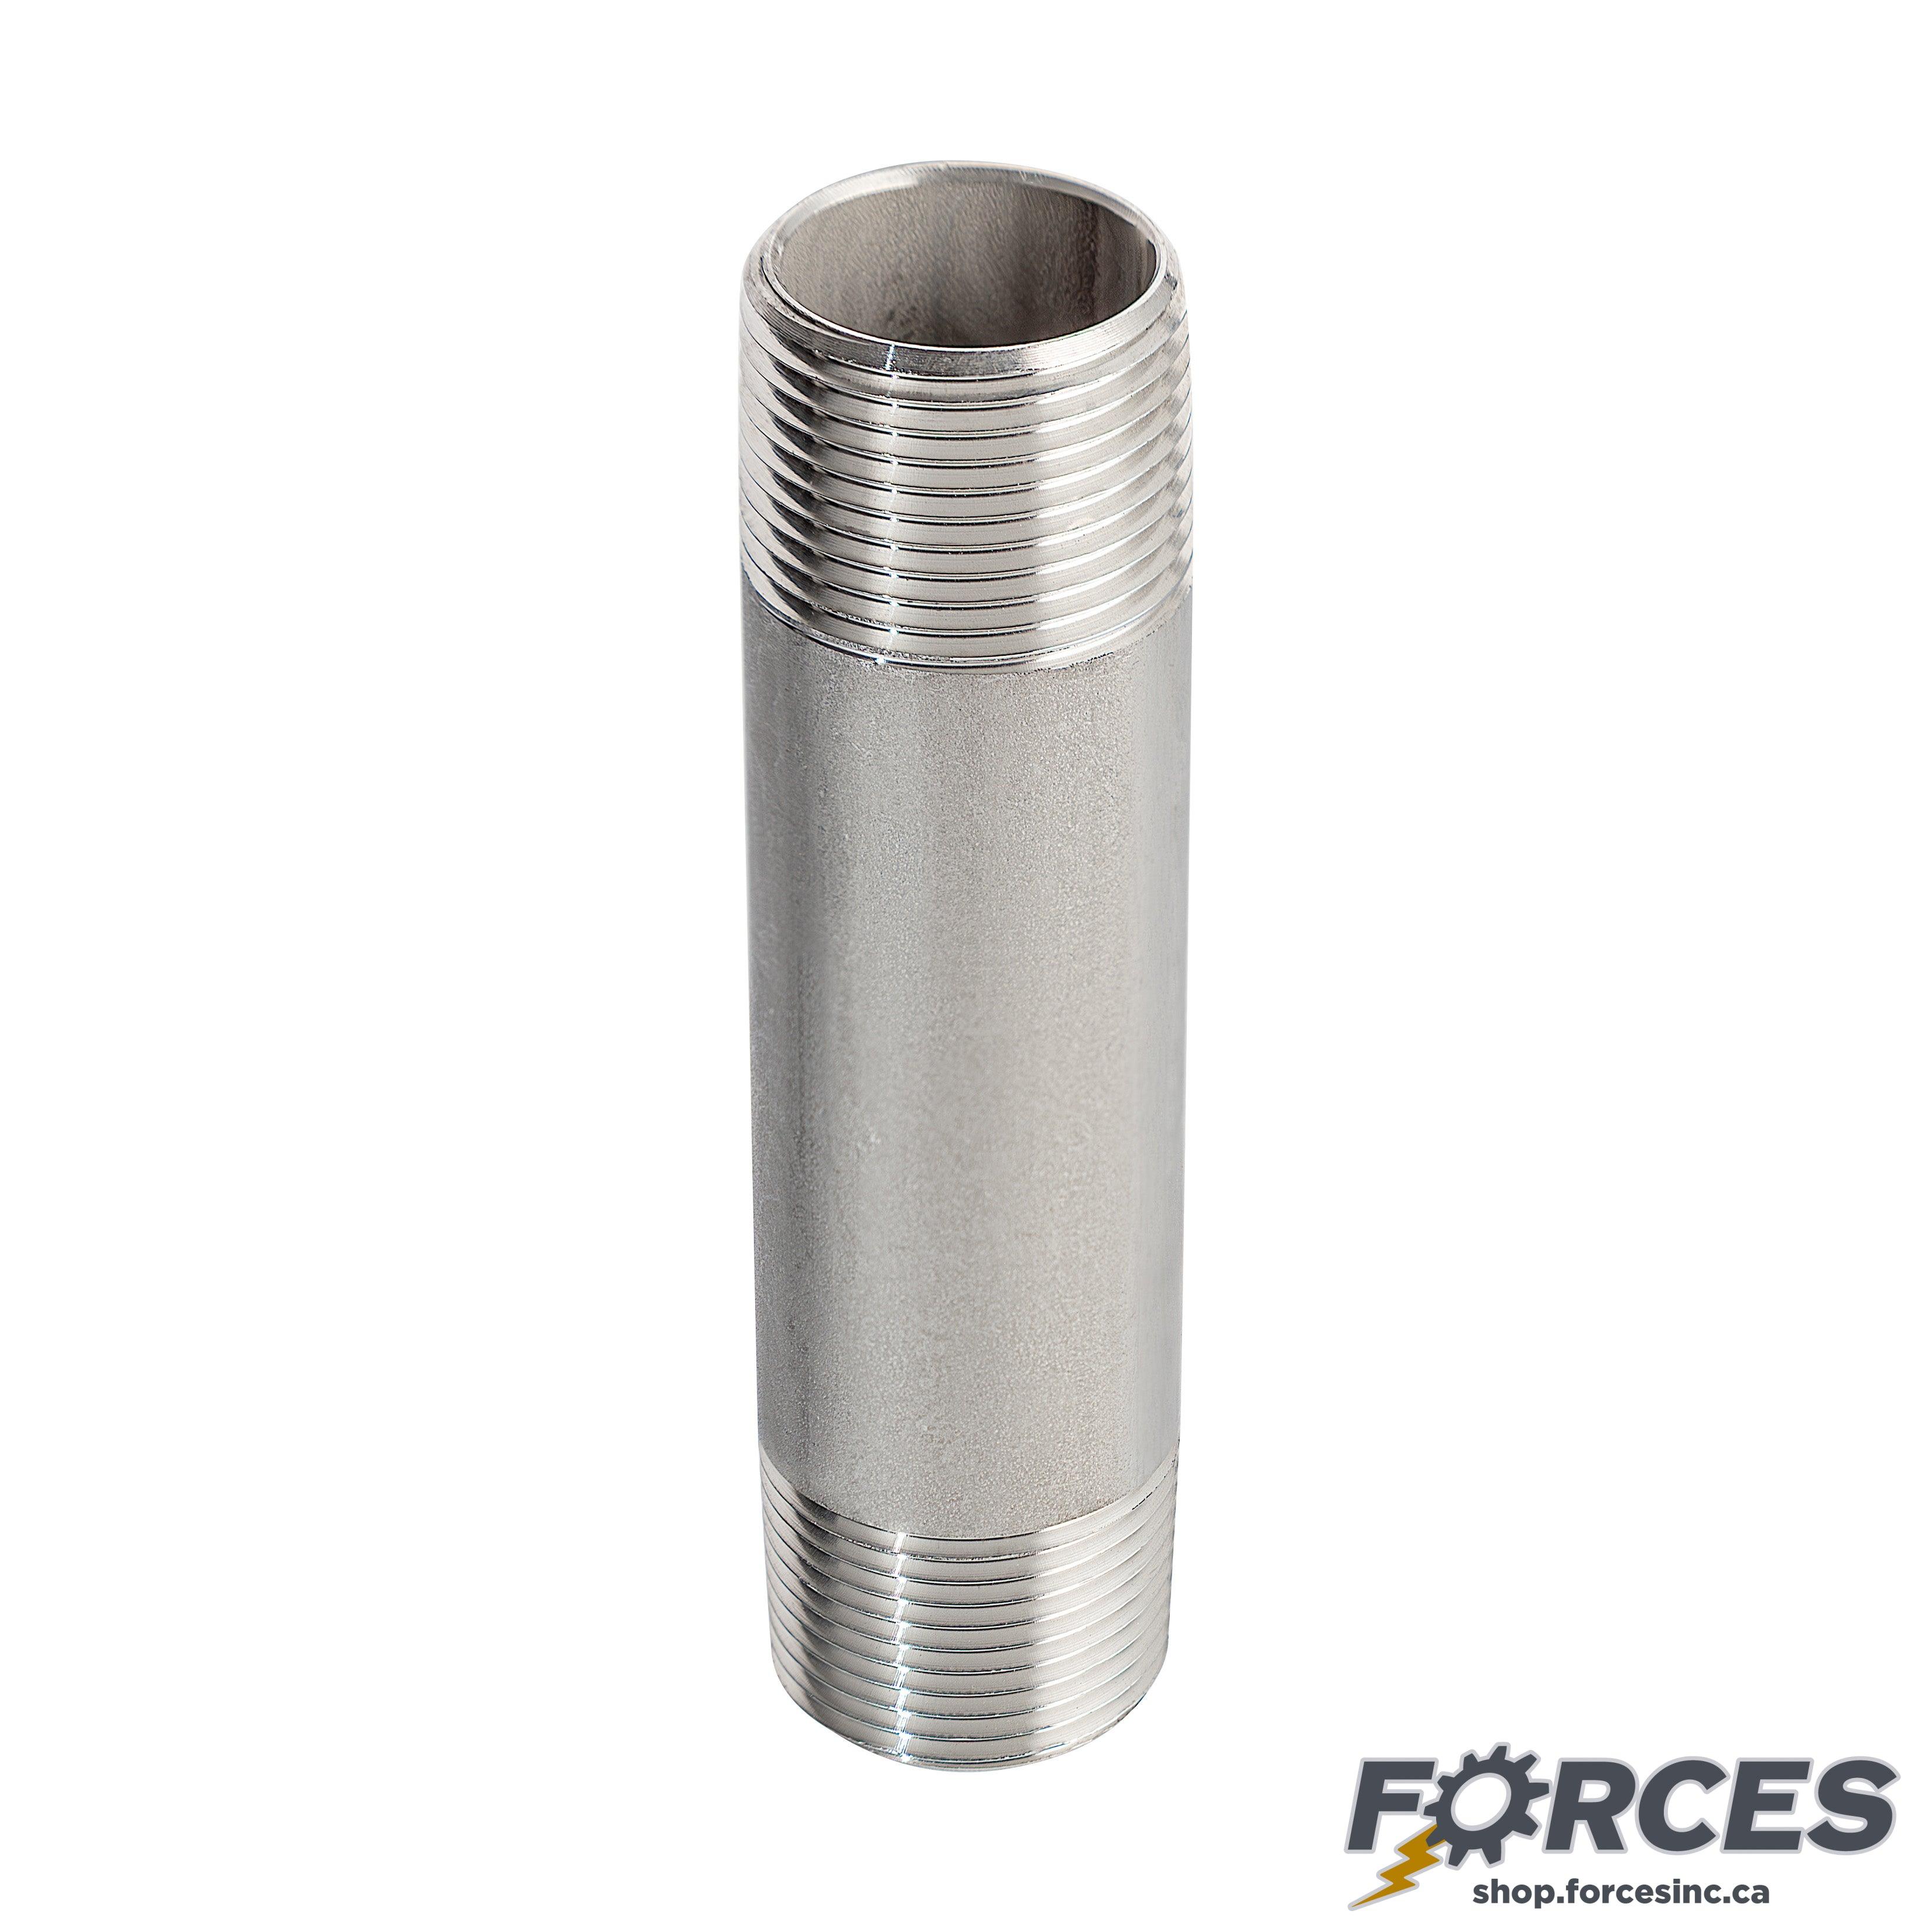 3/4" X 2" Long Nipple - Stainless Steel 316 - Forces Inc